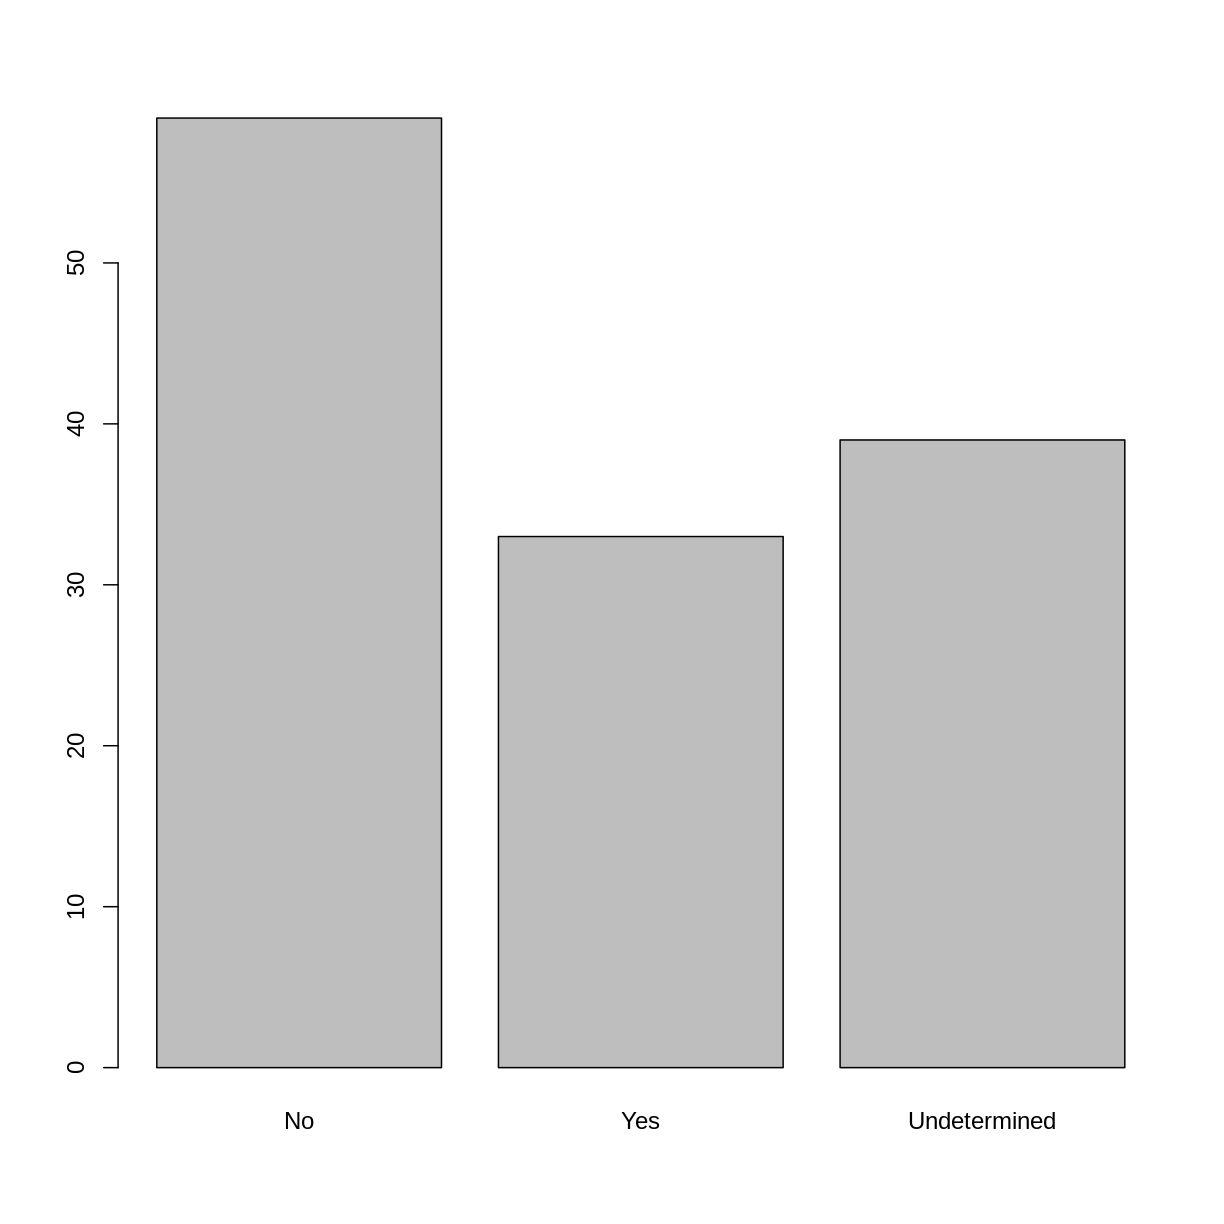 bar graph showing number of individuals who are members of irrigation association, including undetermined option